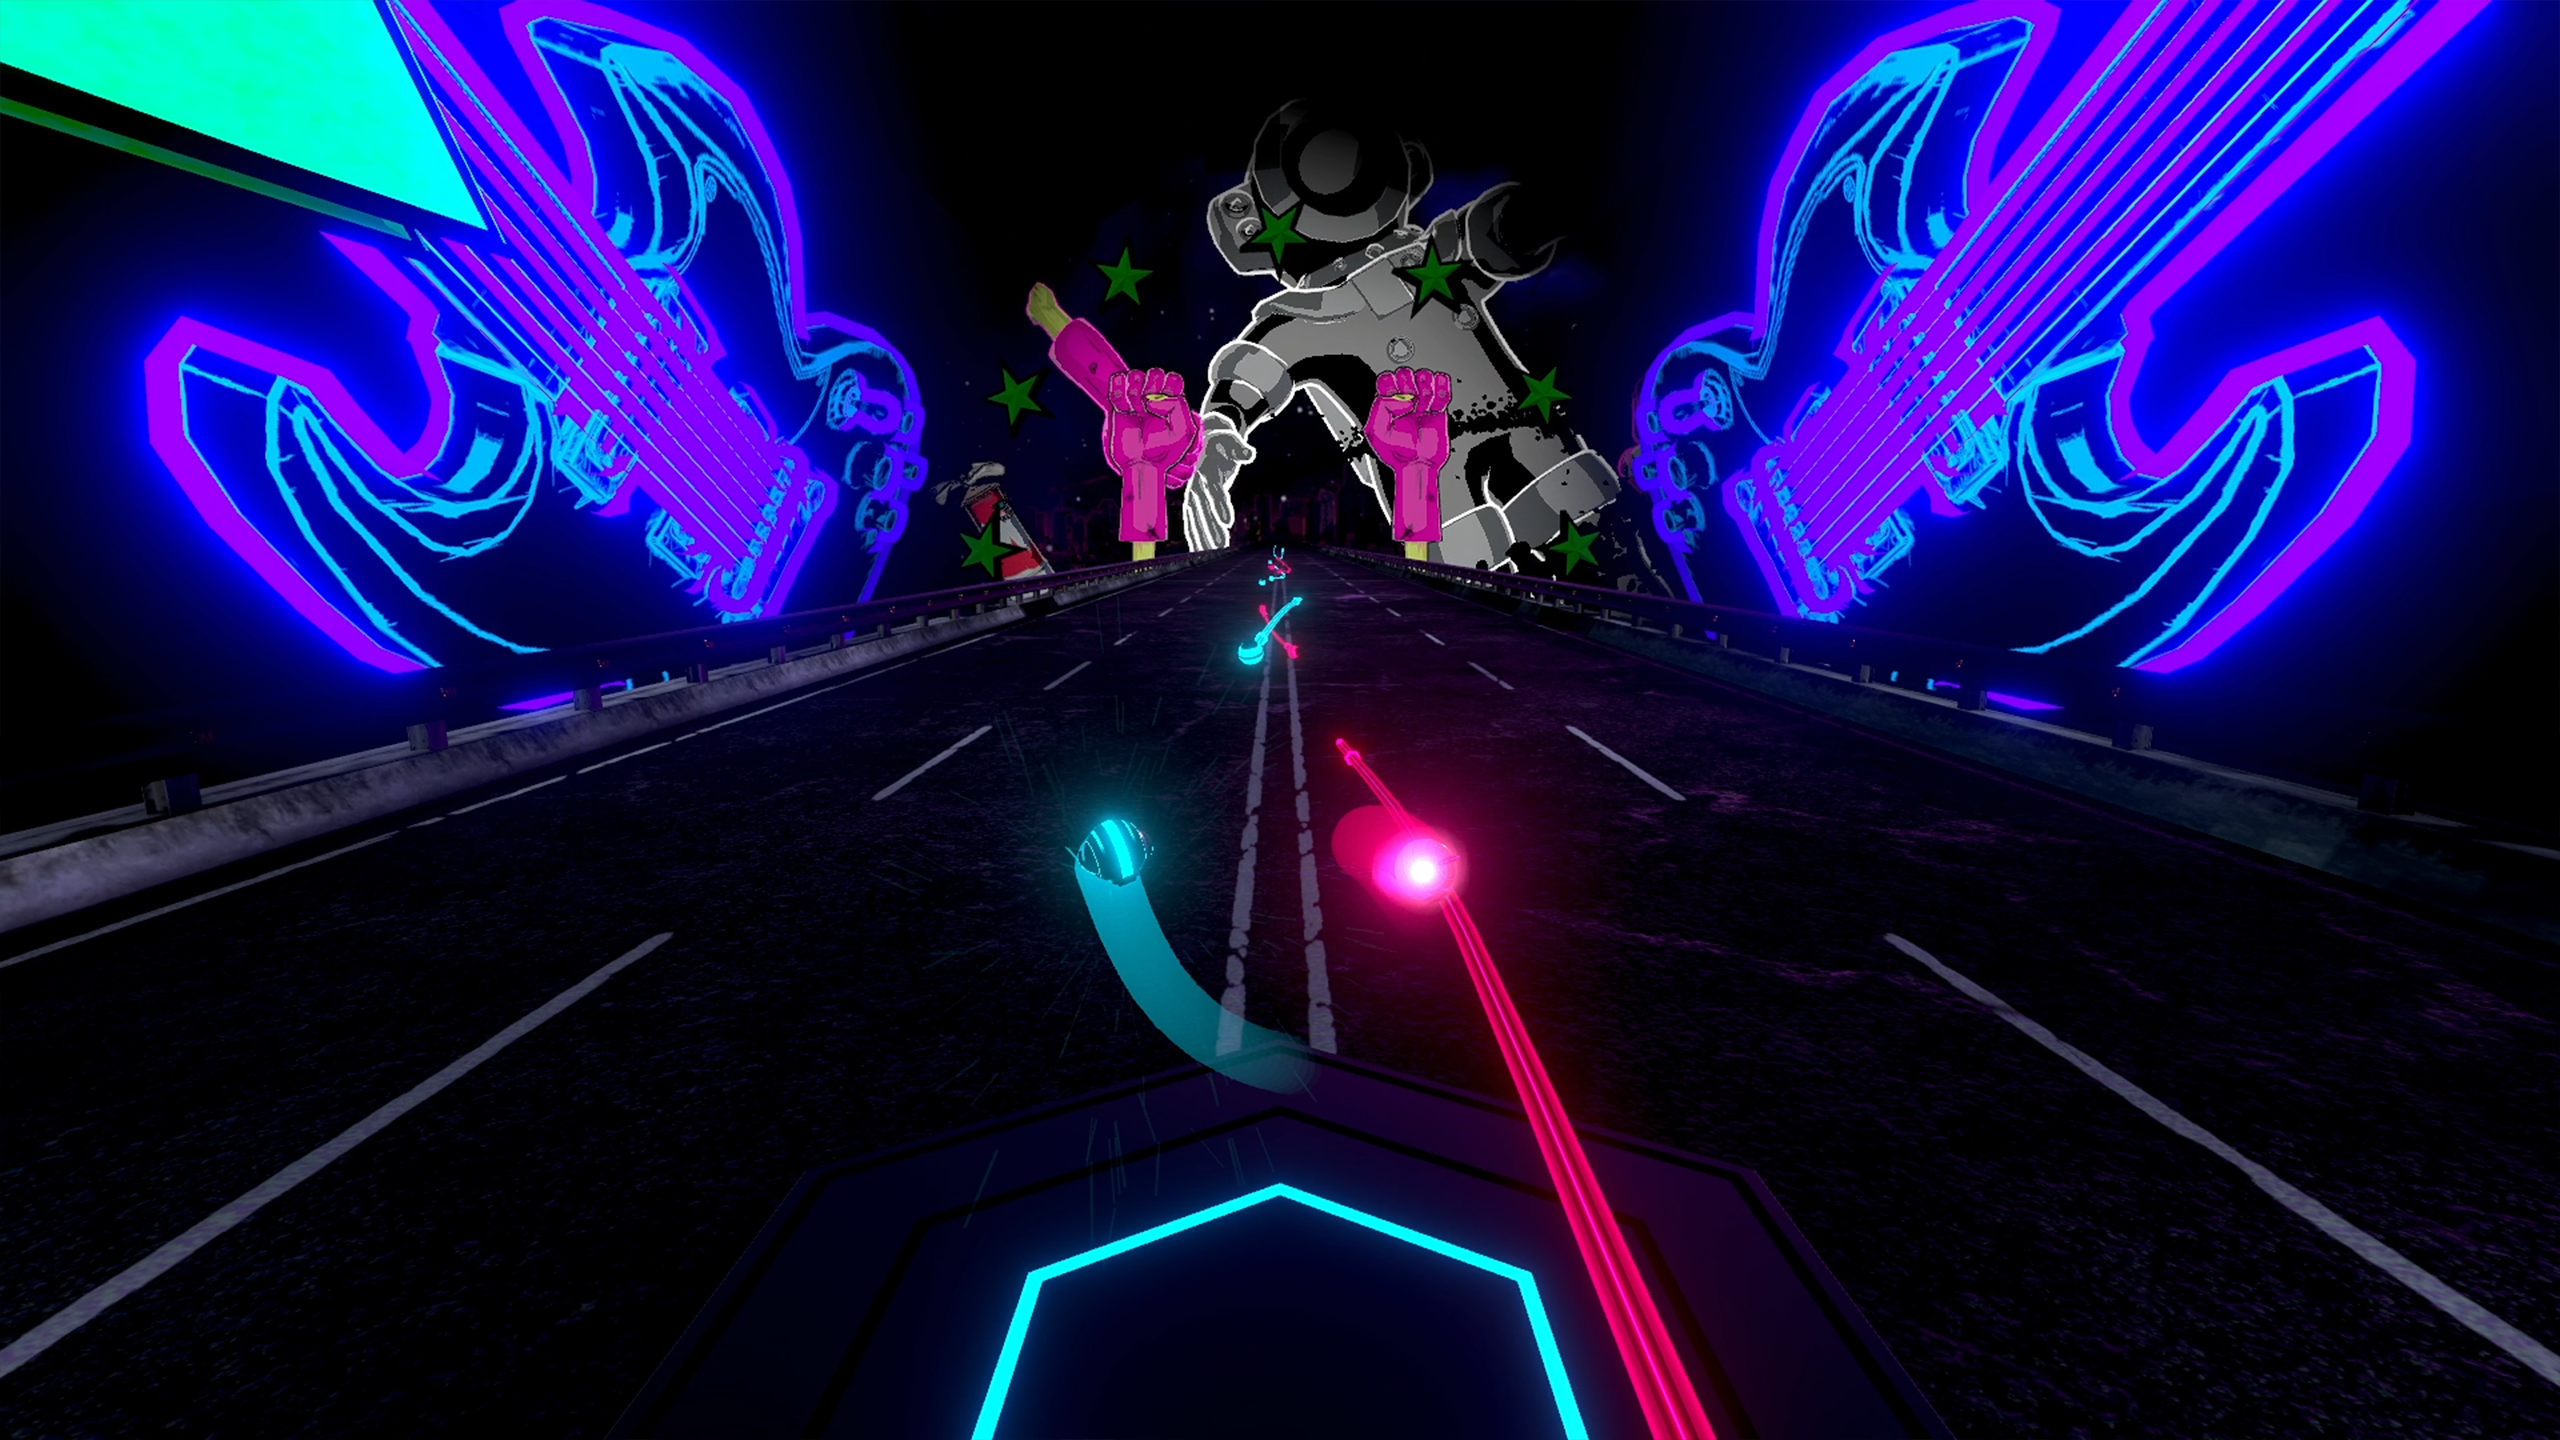 A gameplay screenshot of Synth Riders by Kluge Interactive